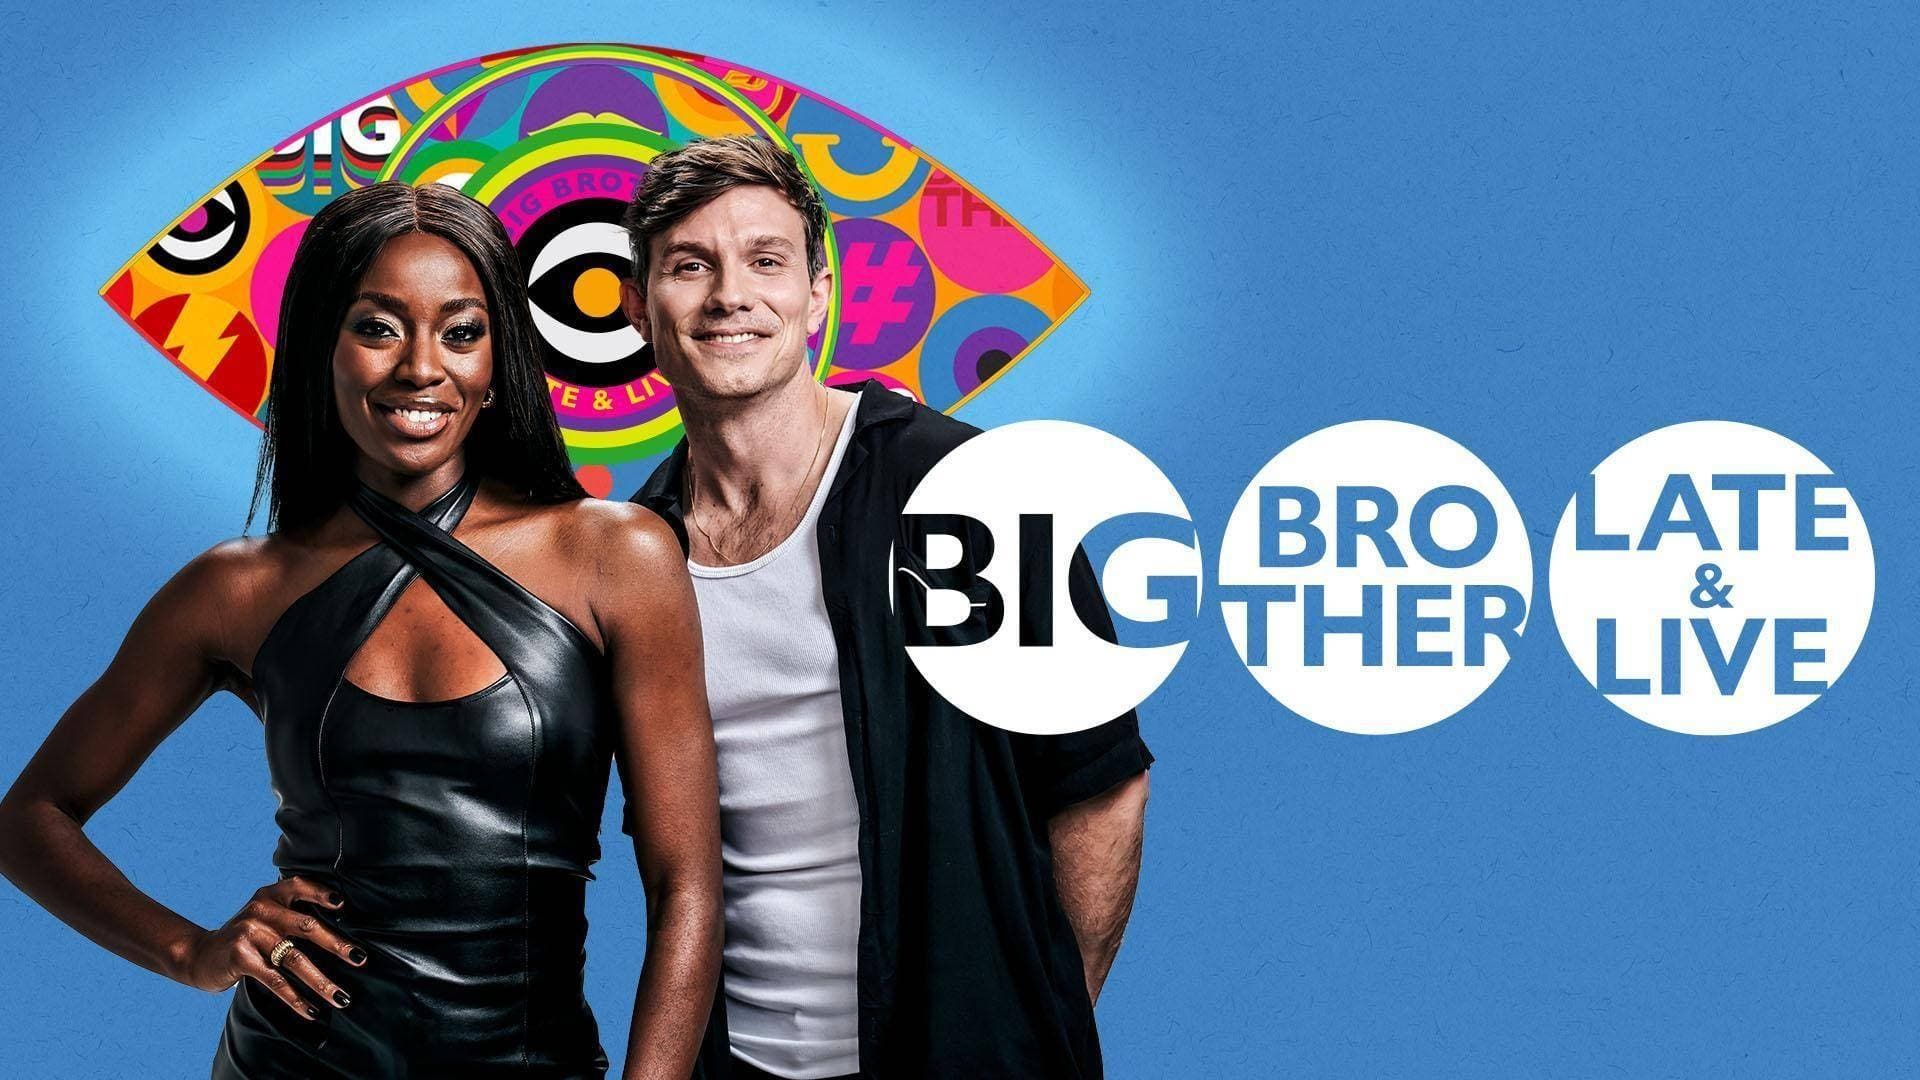 Big Brother: Late & Live background